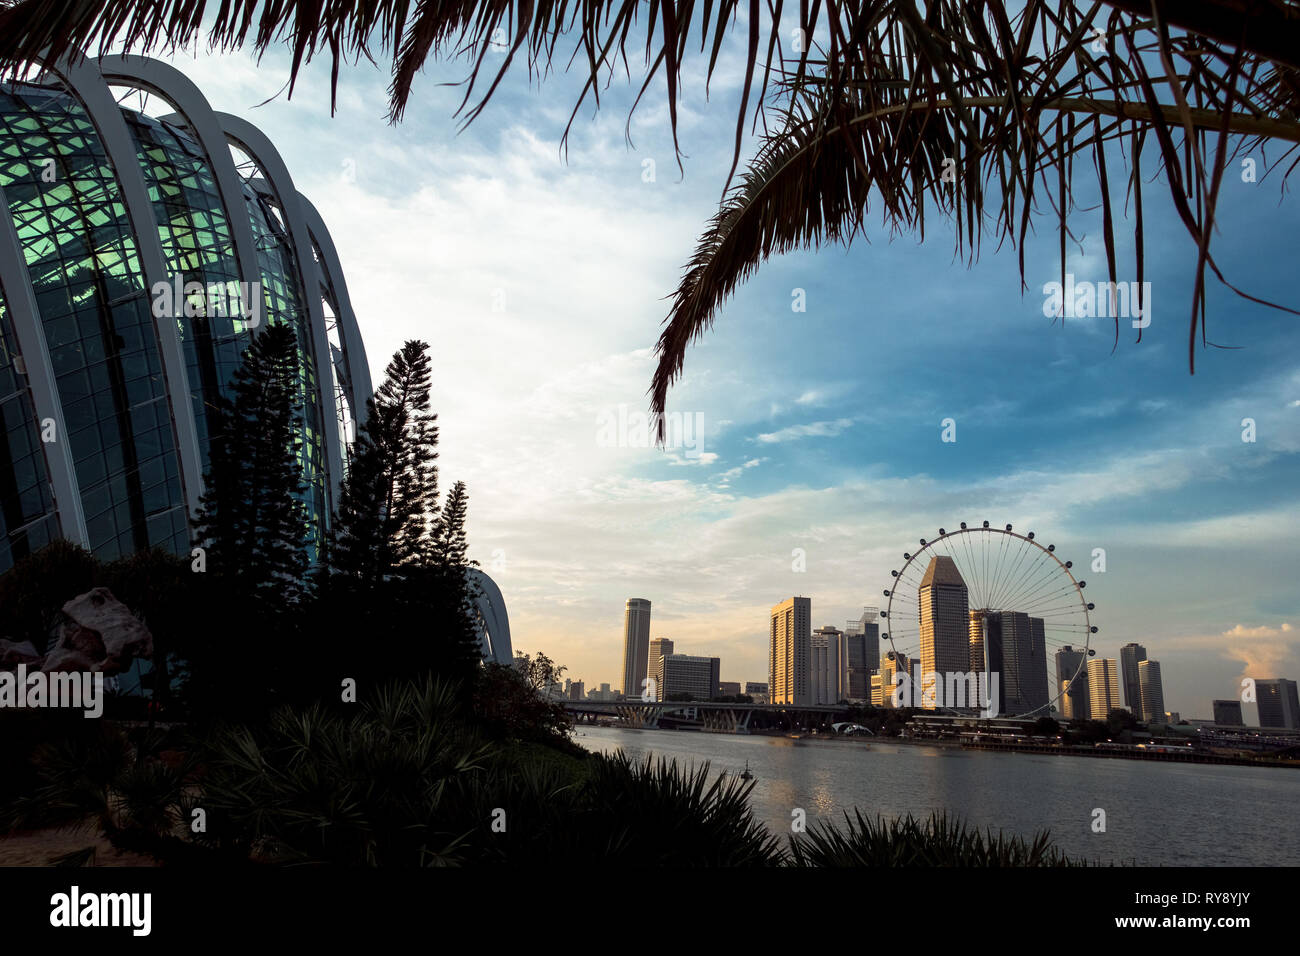 Flower Dome and Downtown buildings with Singapore Flyer Ferris Wheel, from Gardens By The bay - Singapore Stock Photo